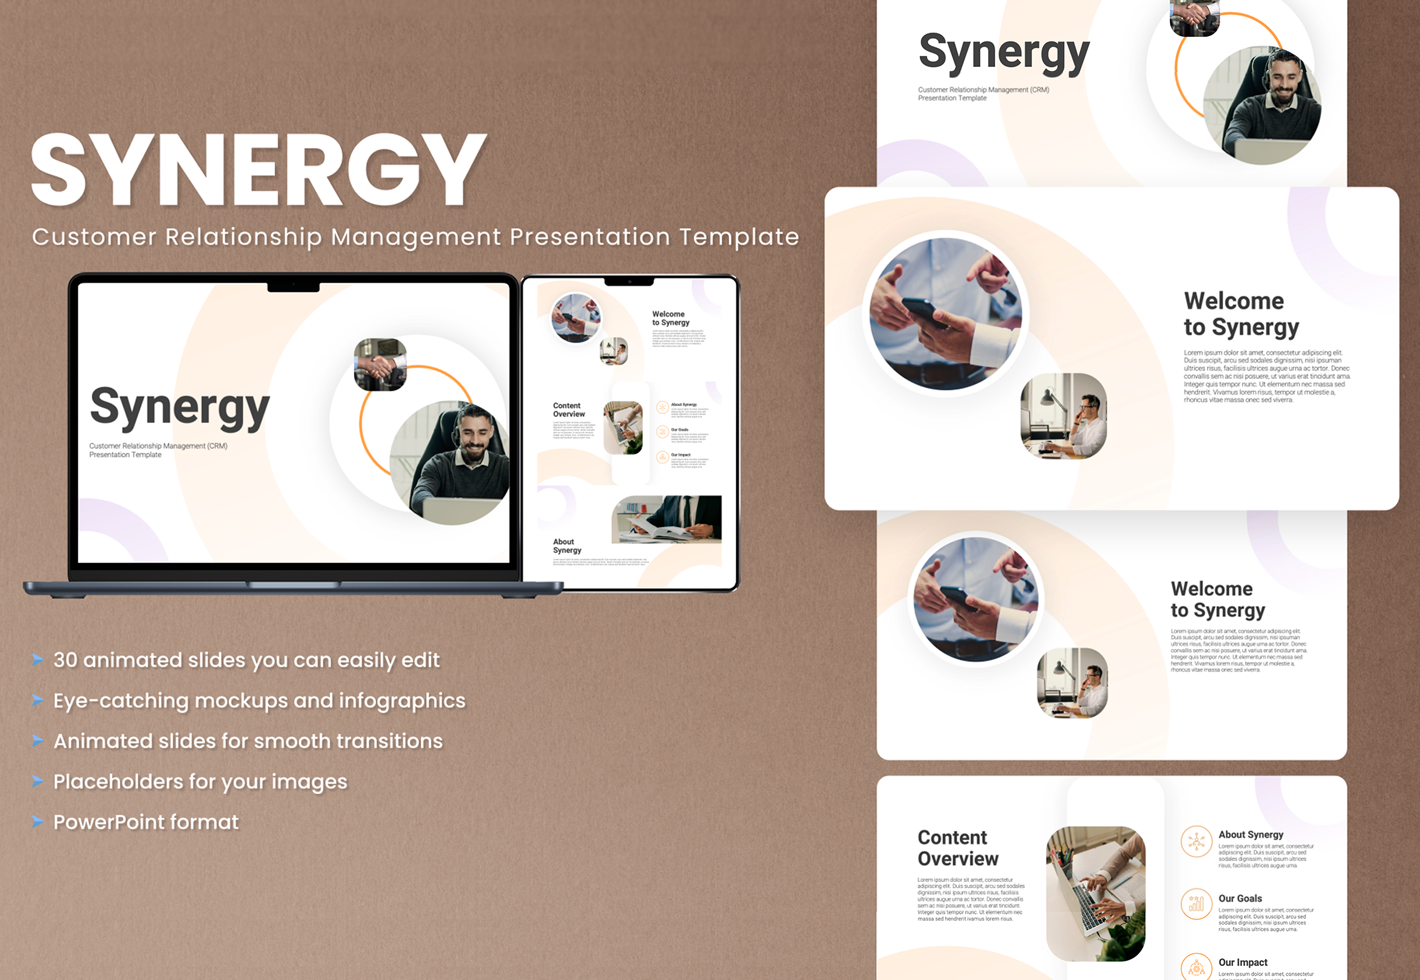 powerpoint presentation templates with animation